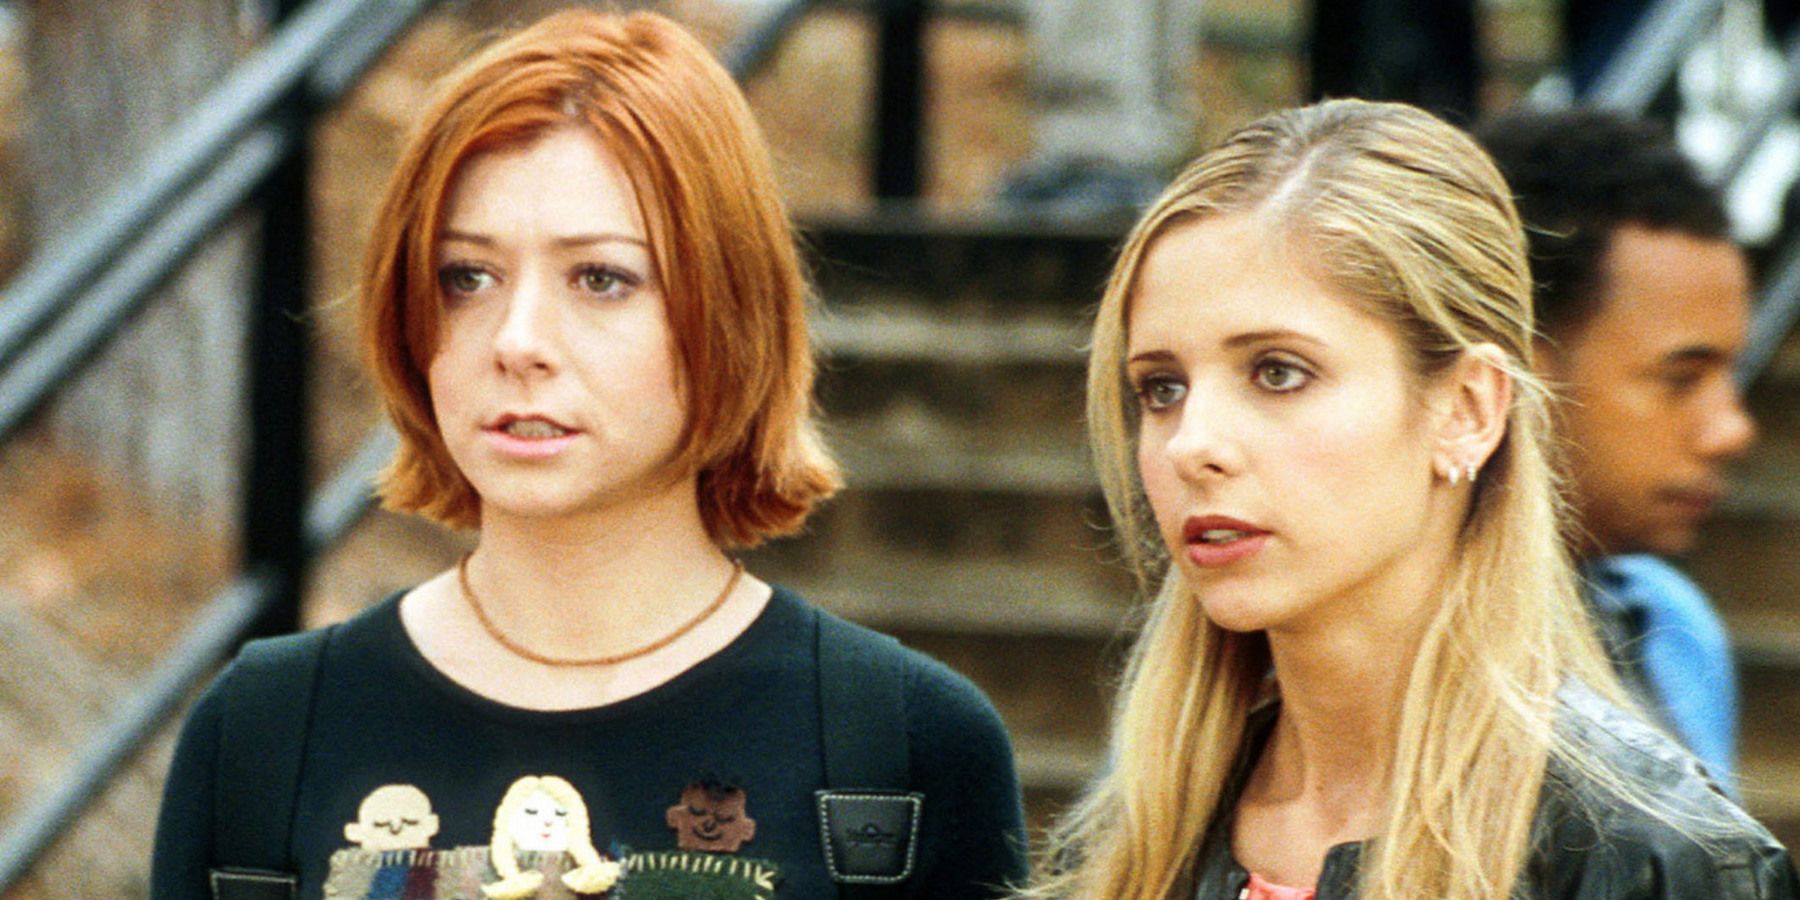 Buffy and Willow in Buffy the Vampire Slayer